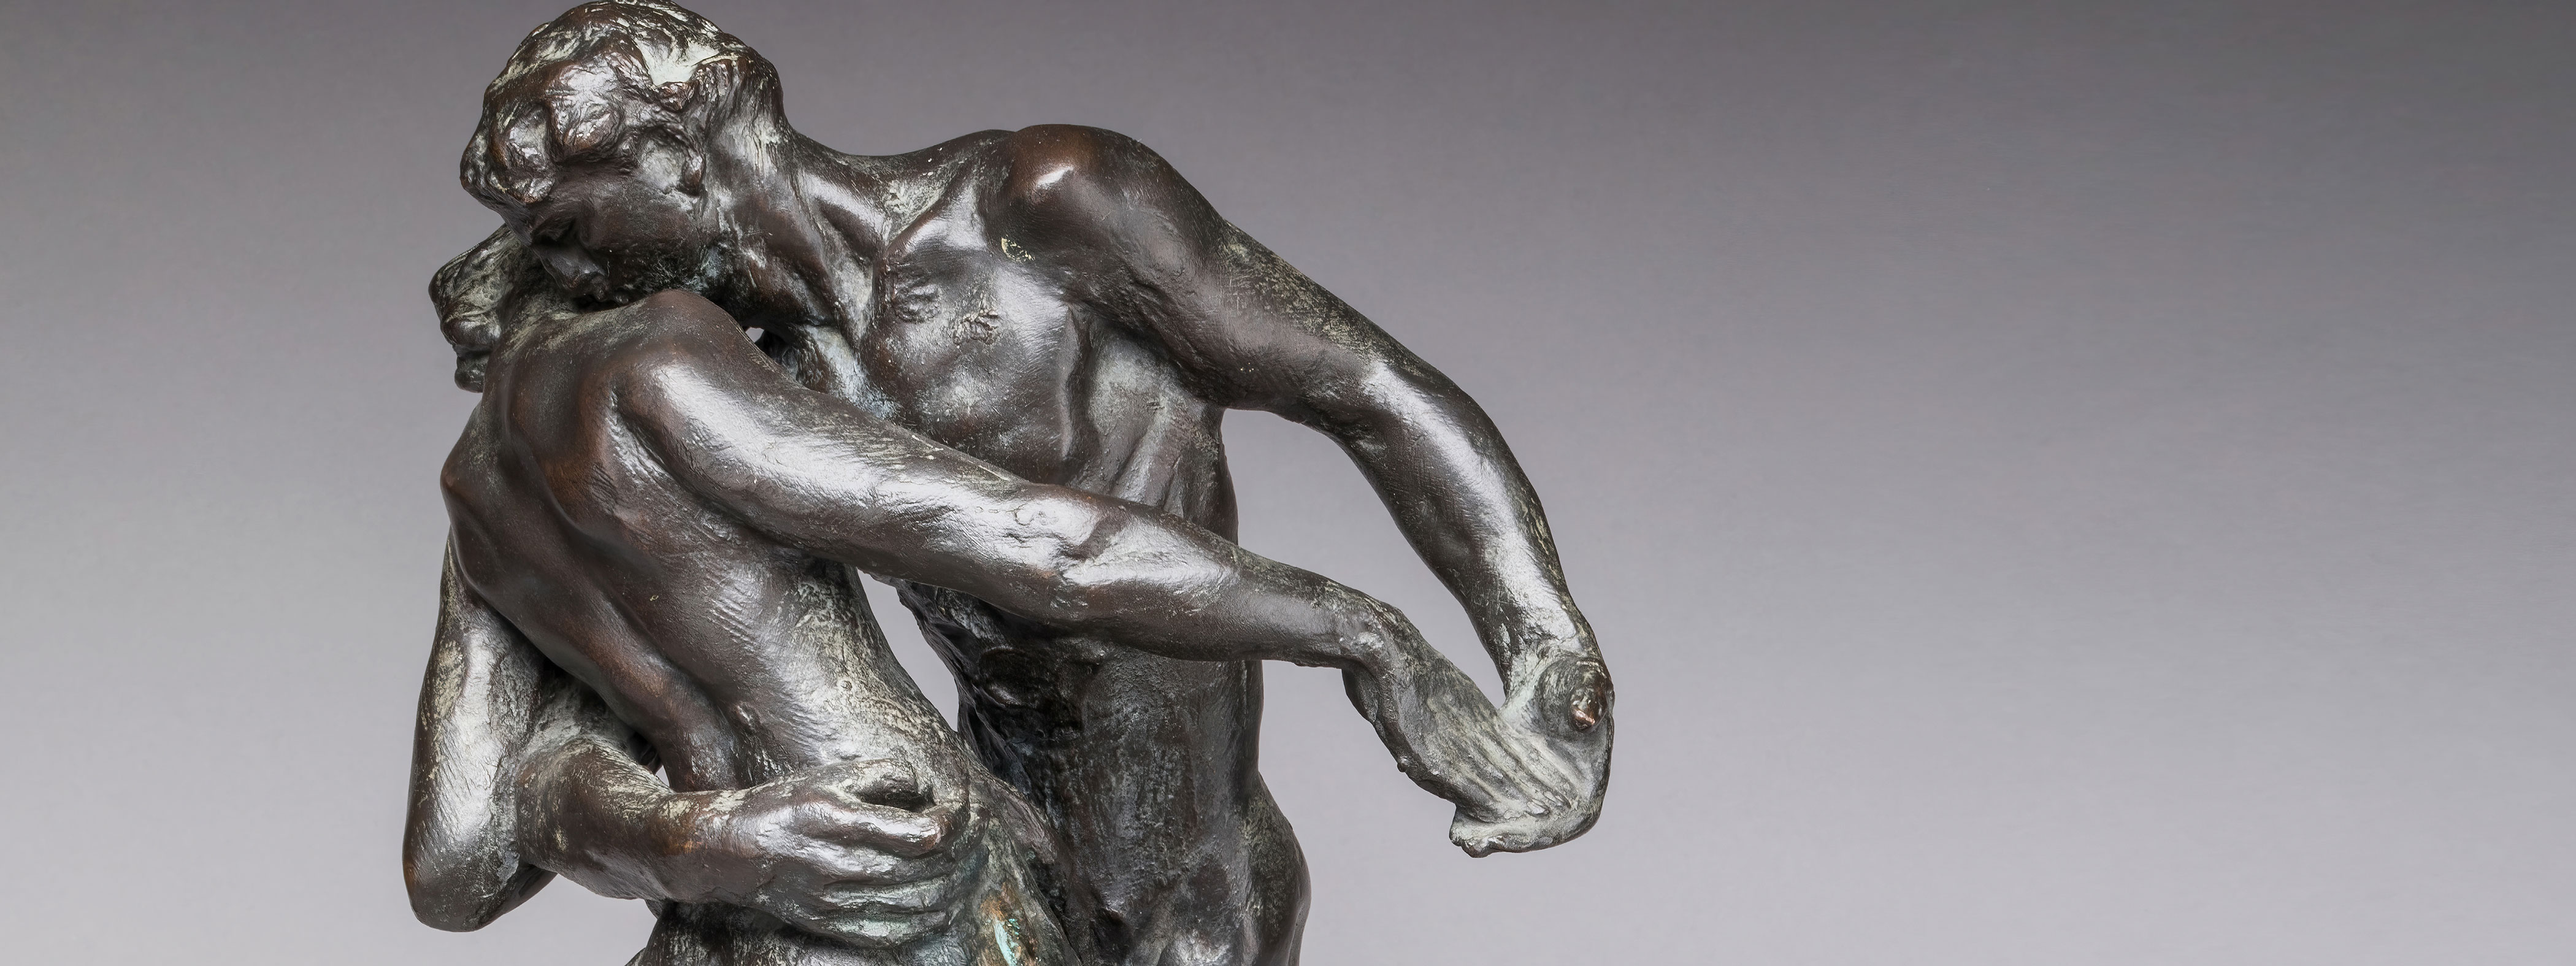 The Waltz (Allioli) (detail), about 1900, Camille Claudel. Bronze. Private collection. Photo: Musée Yves Brayer